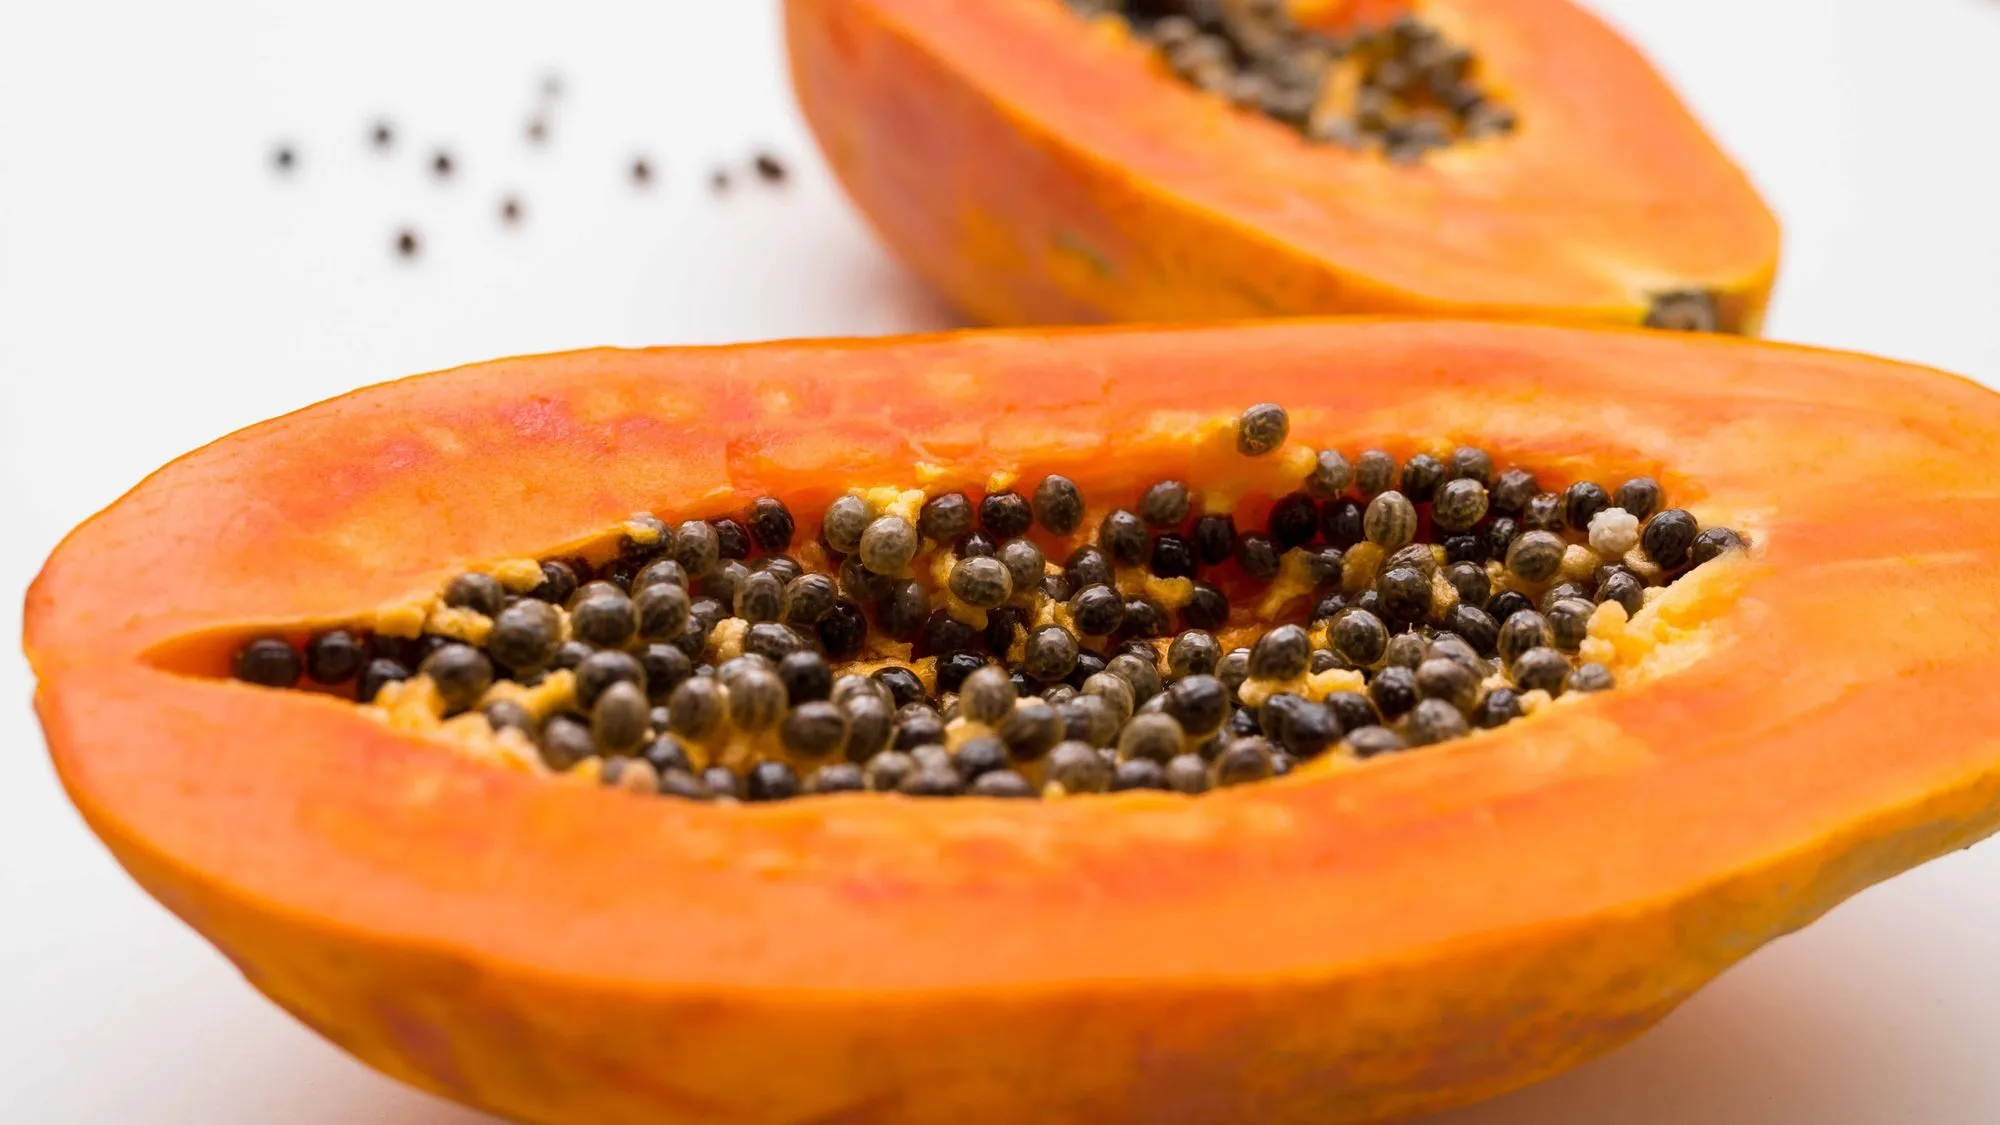 Papaya is a rich source of fiber for dogs and is good for their skin as well.